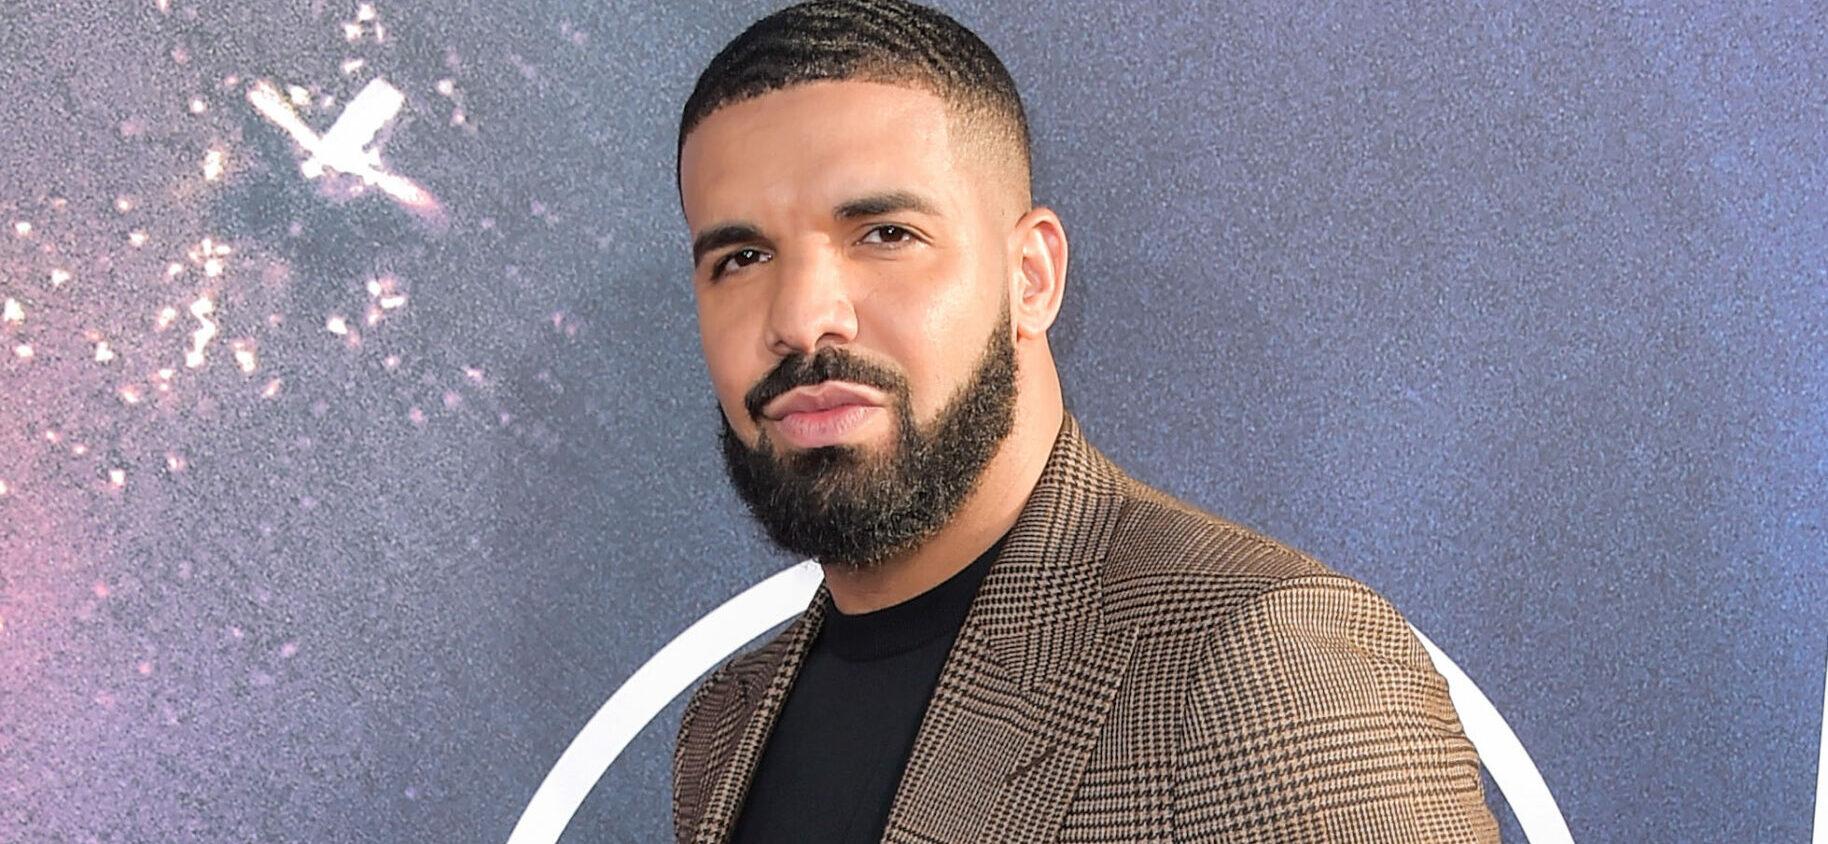 Rapper Drake Could Make $50 Million From NFT Series, Says Tory Lanez